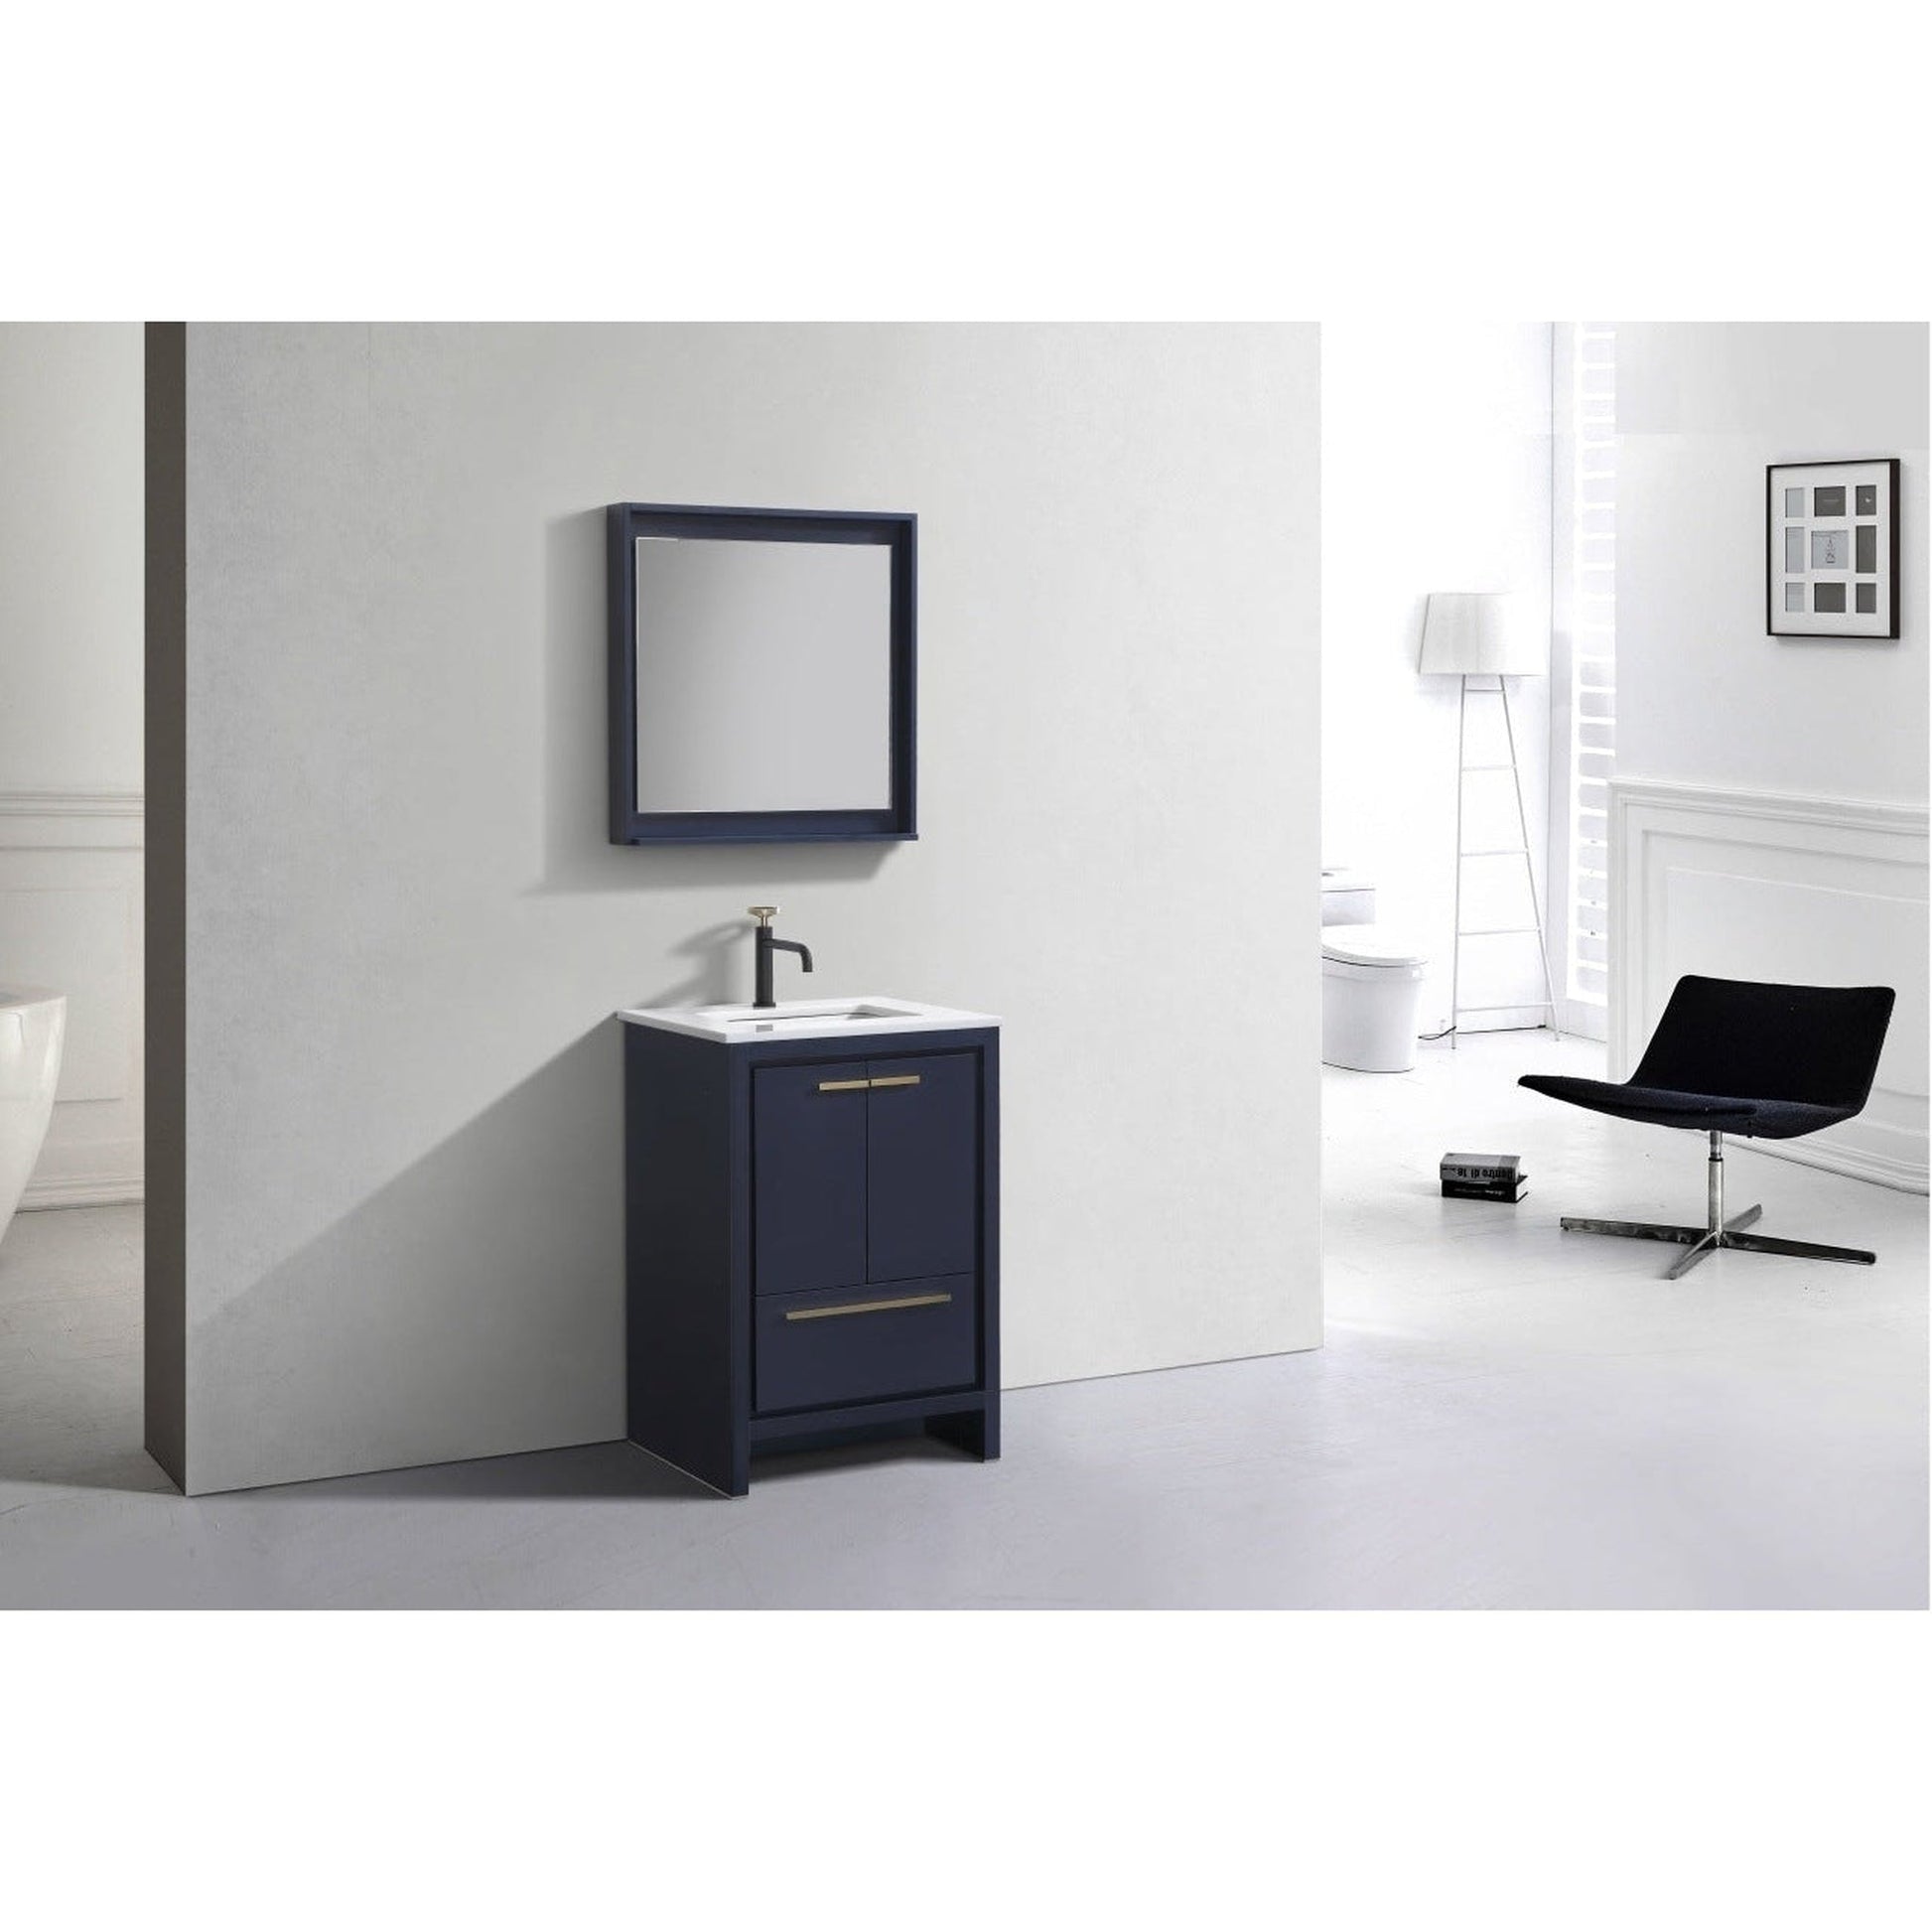 KubeBath Dolce 24" Blue Freestanding Modern Bathroom Vanity With Quartz Vanity Top & Ceramic Sink With Overflow and 24" White Framed Mirror With Shelf